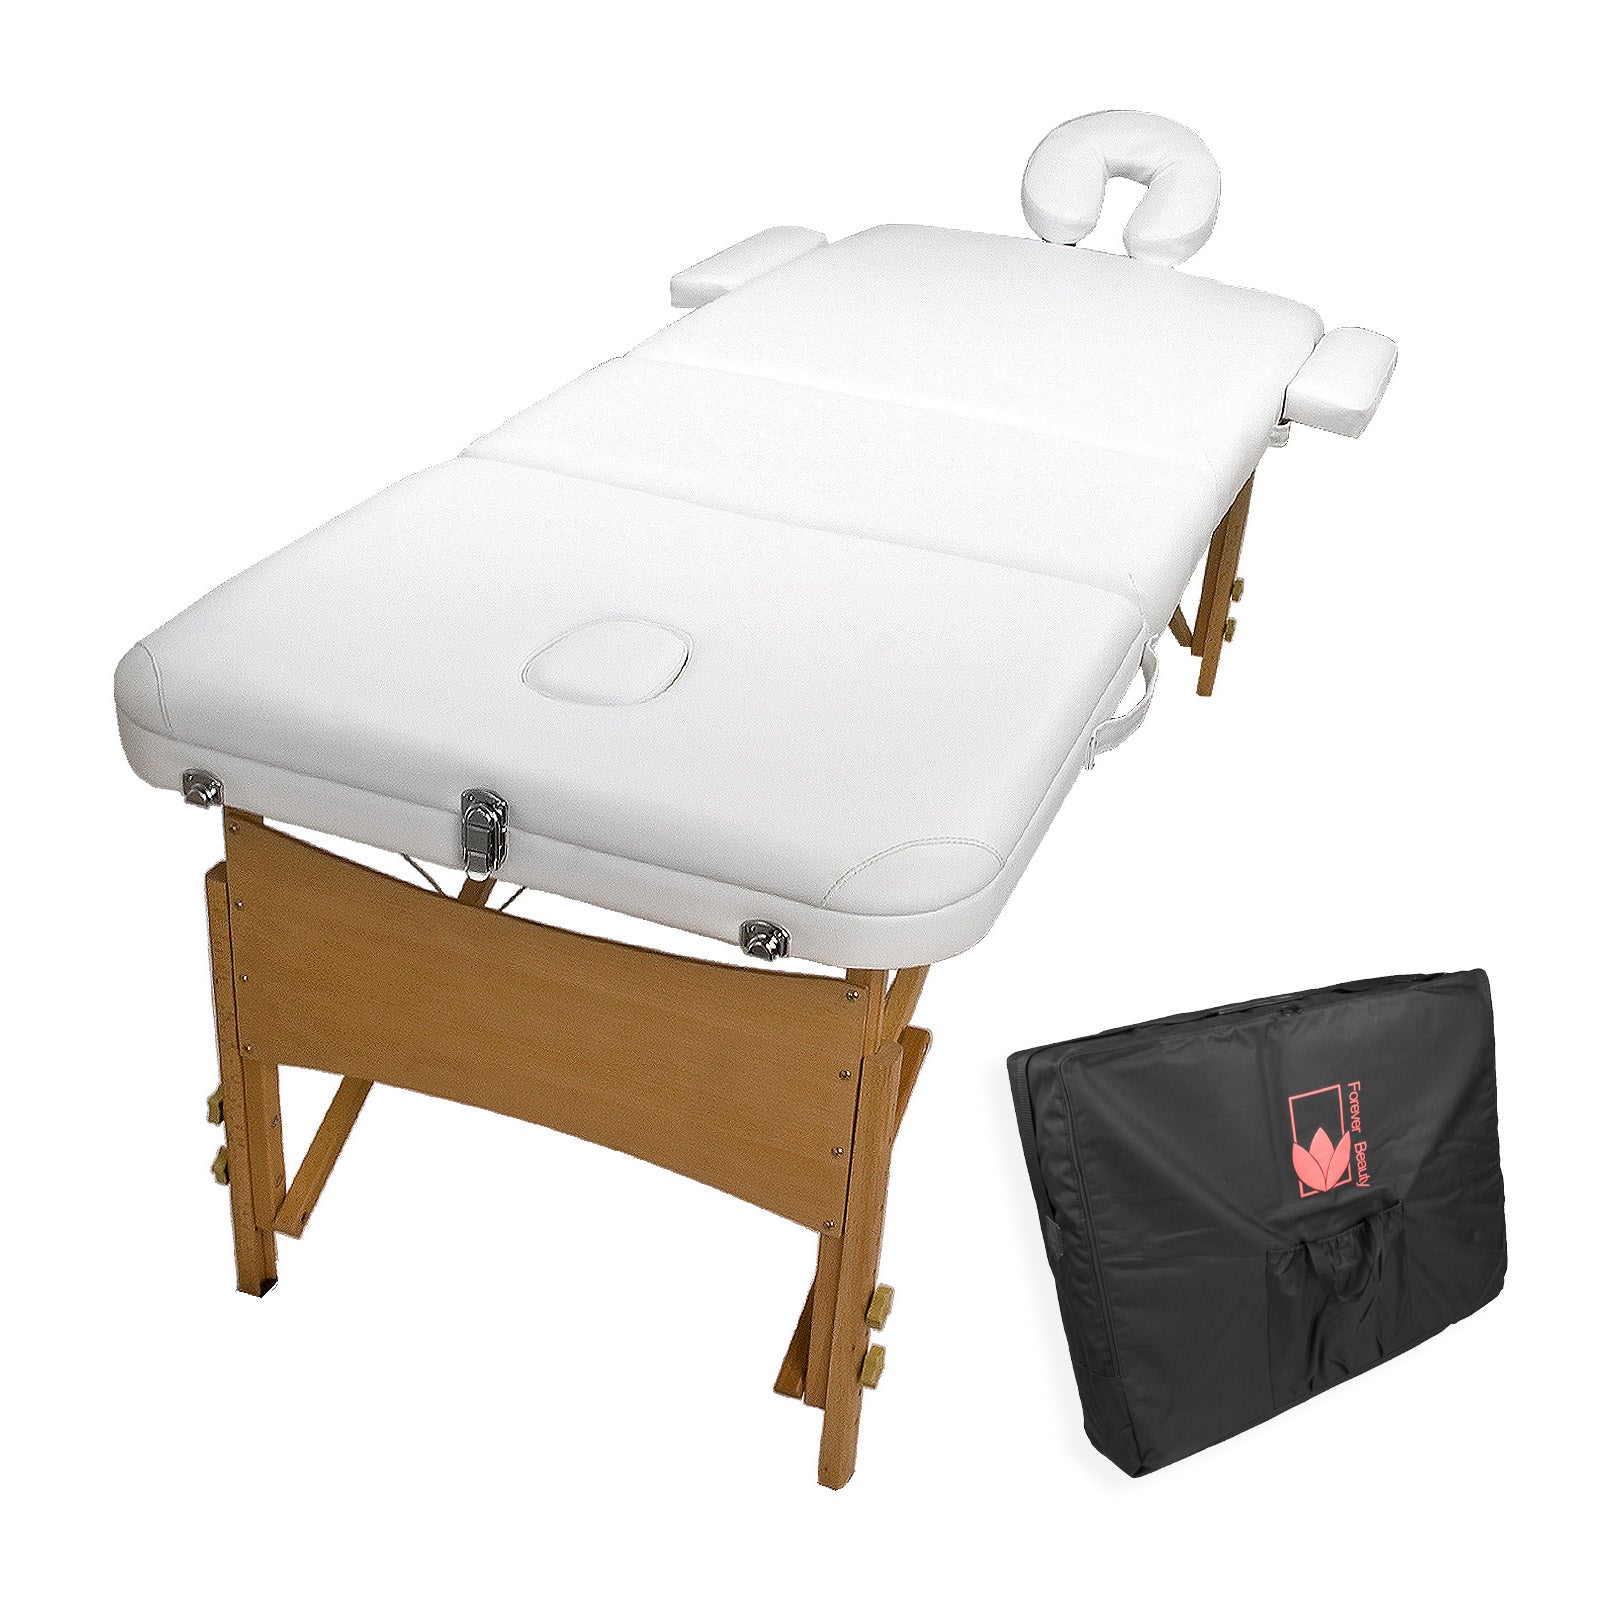 forever-beauty-white-portable-beauty-massage-table-bed-3-fold-70cm-wooden